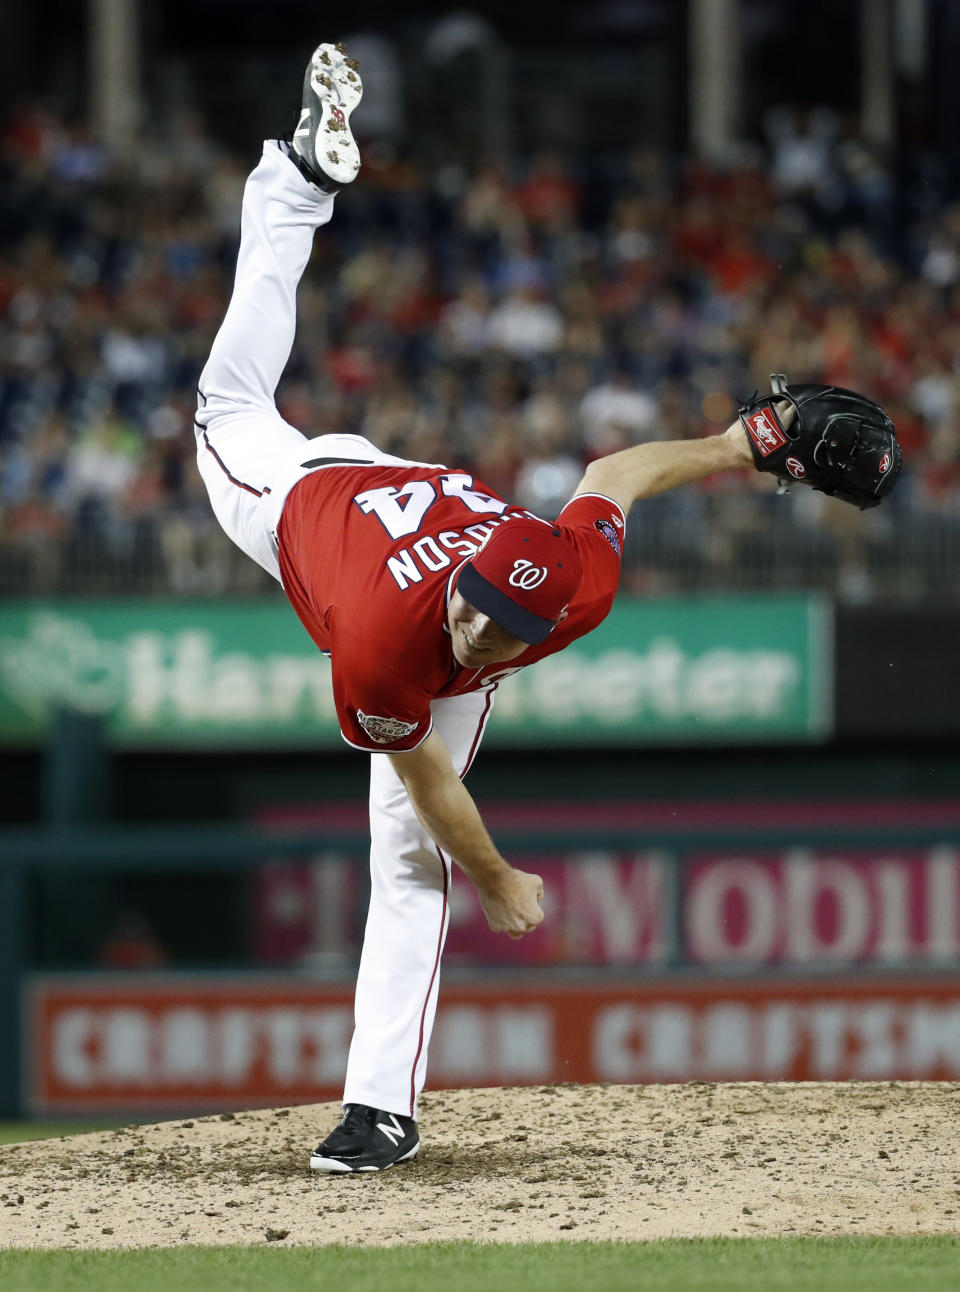 Washington Nationals reliever Ryan Madson watches a pitch during the eighth inning of the second baseball game of a doubleheader against the Cincinnati Reds at Nationals Park, Saturday, Aug. 4, 2018, in Washington. The Nationals won 6-2. (AP Photo/Alex Brandon)